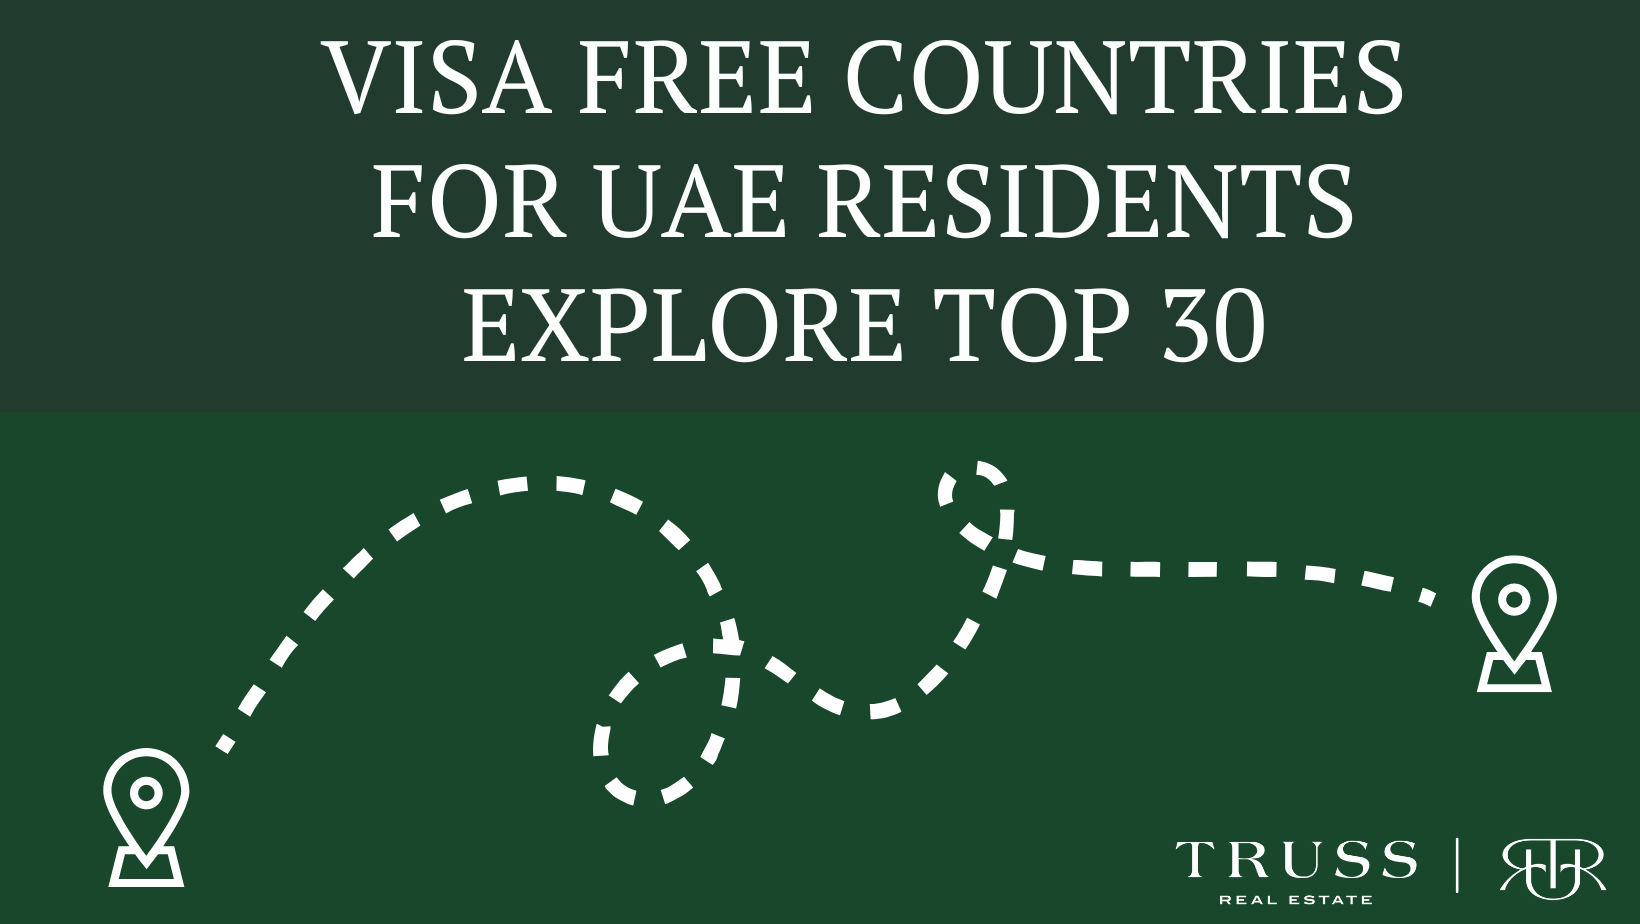 Visa Free Countries for UAE Residents